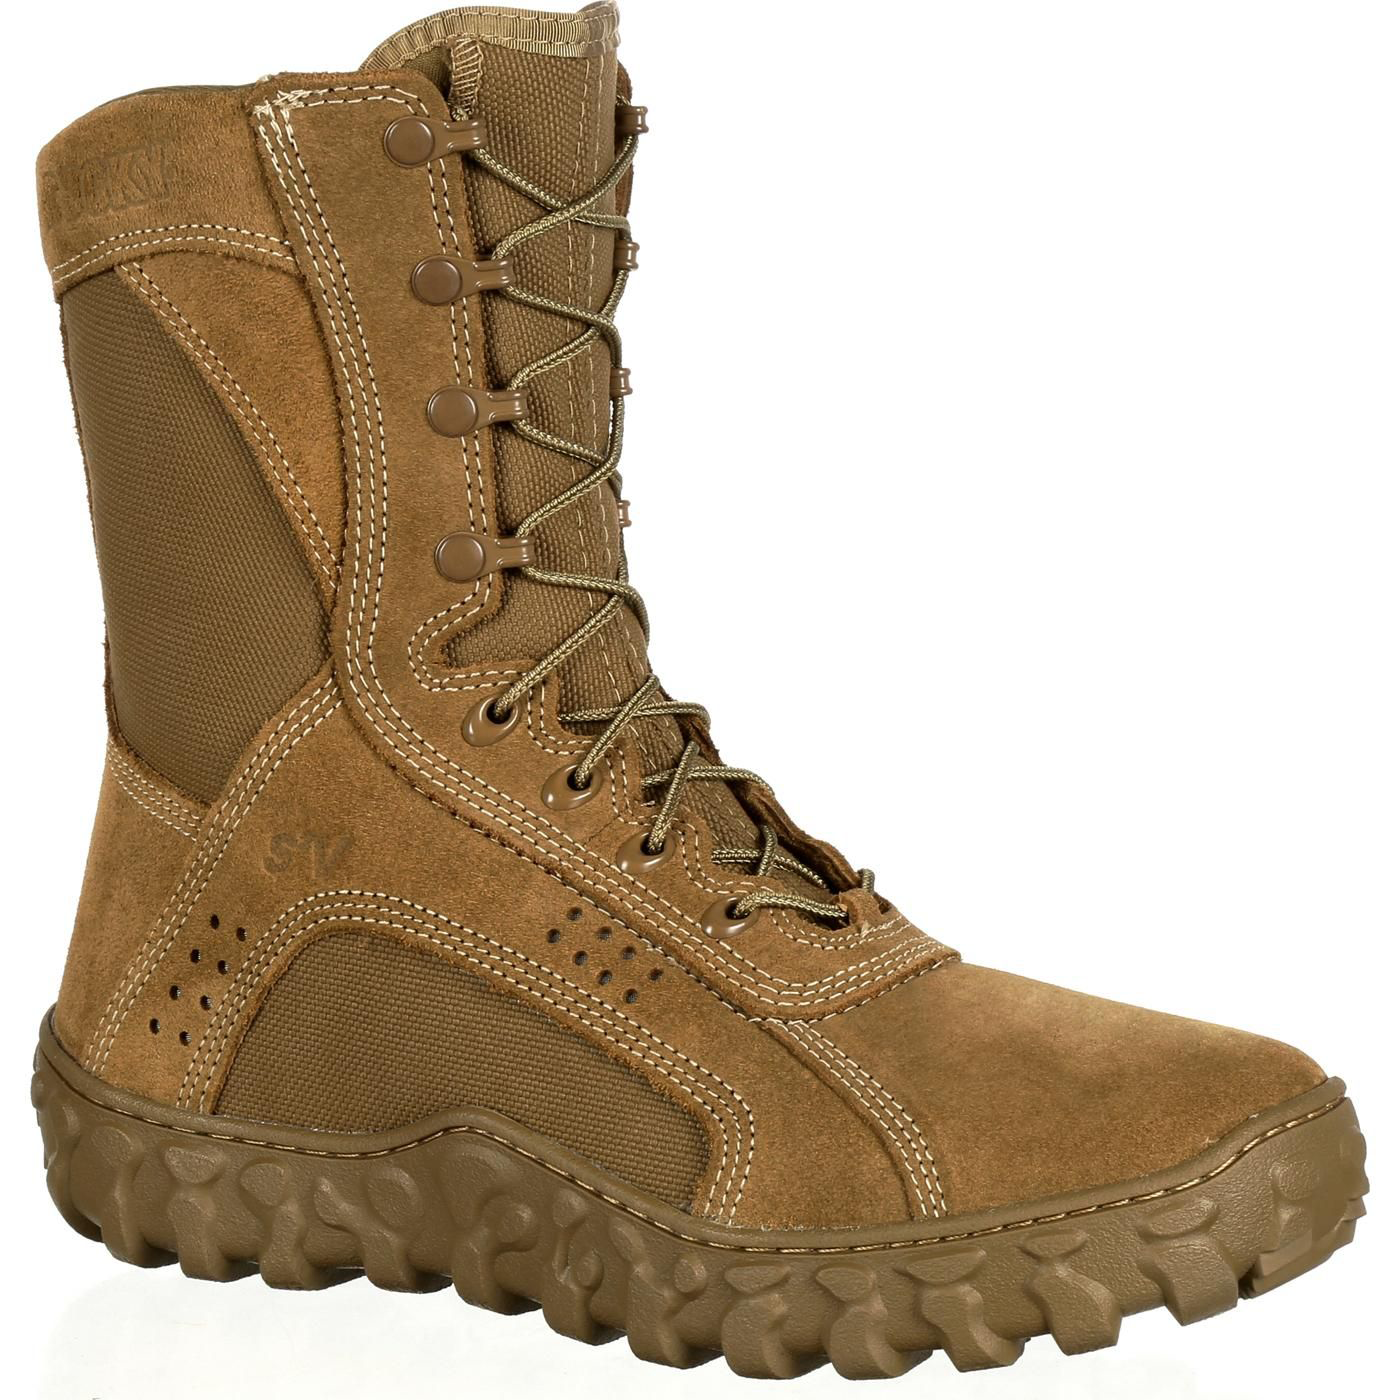 Rocky S2V Tactical Military Boots for Men - Coyote Brown - 8M